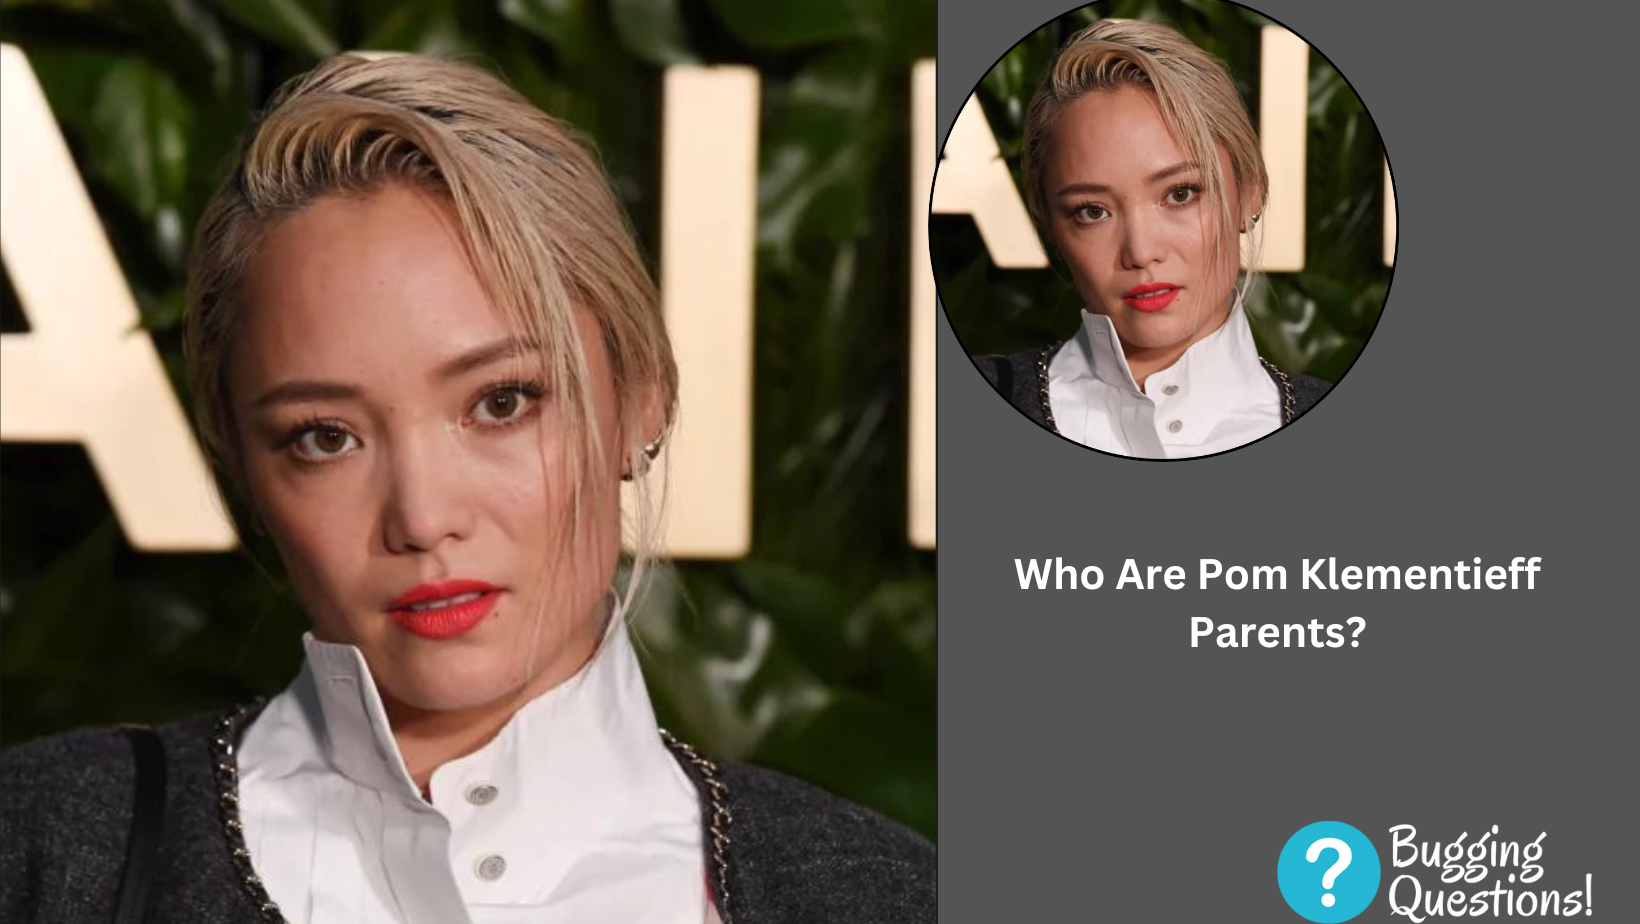 Who Are Pom Klementieff Parents?